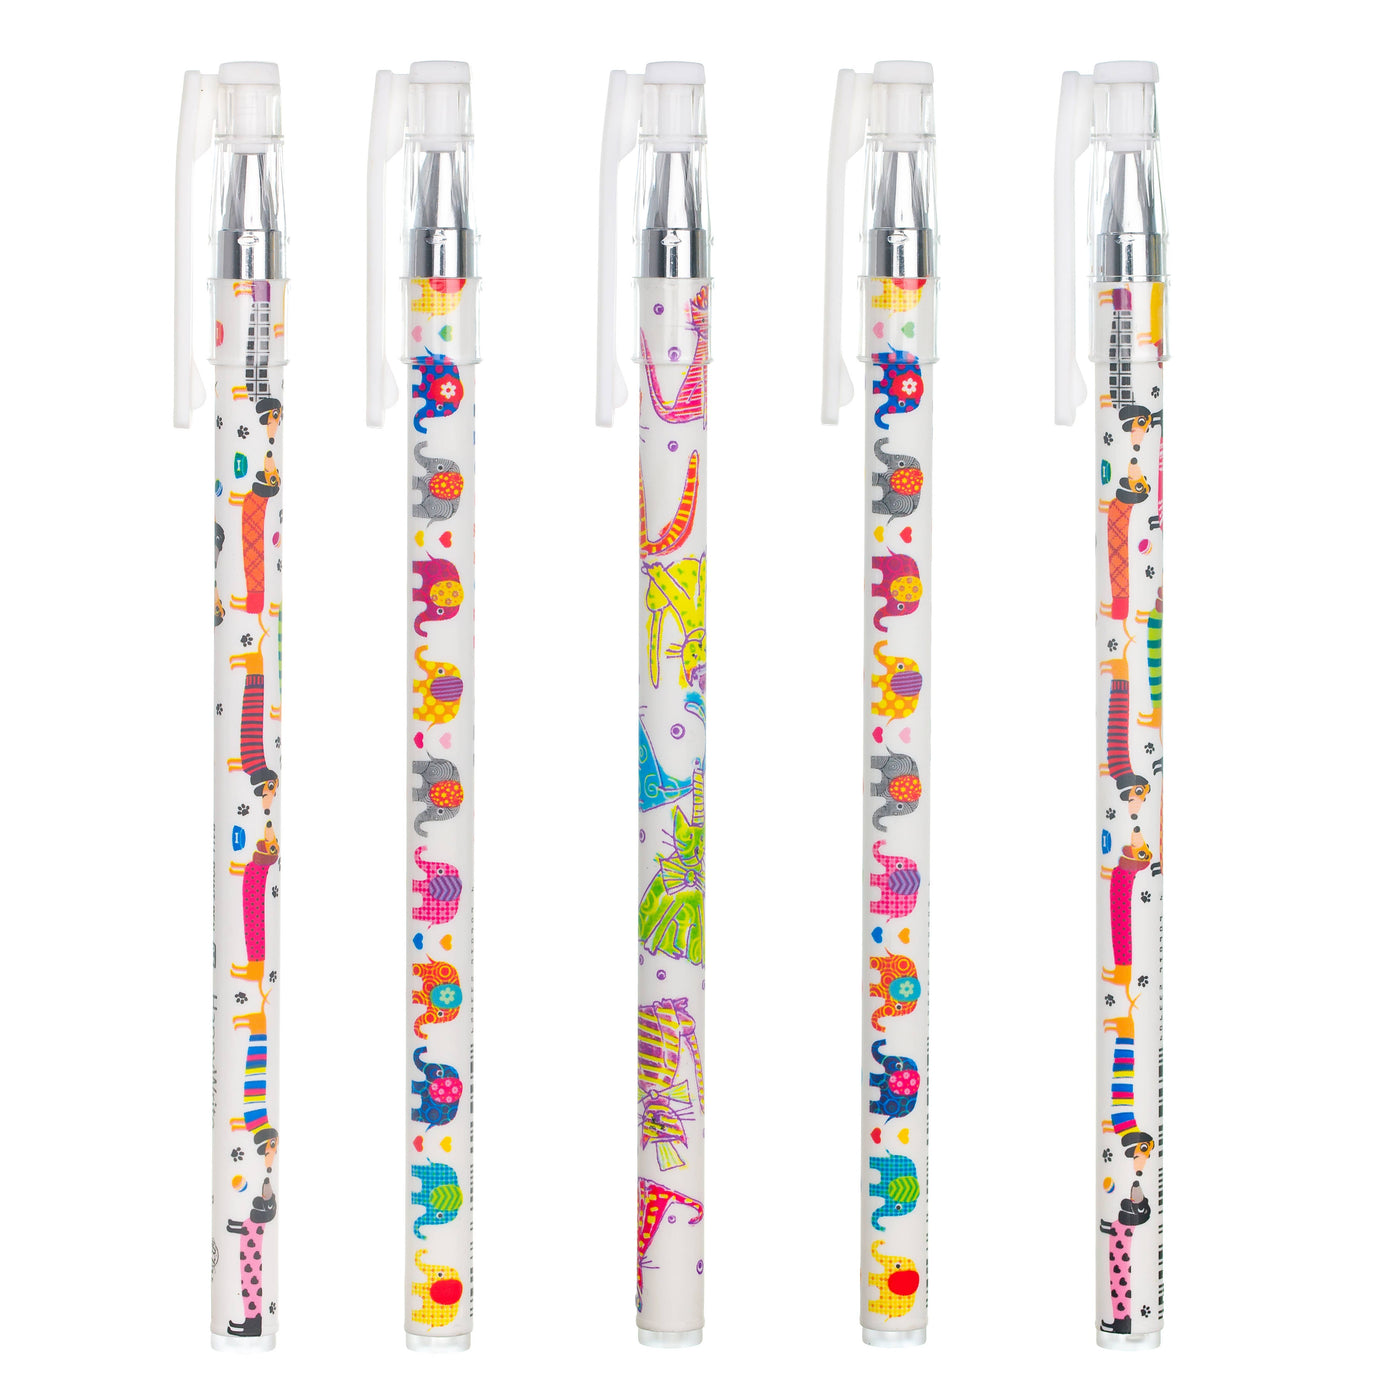 HappyWrite 5 Pack Ballpoint Pens, 0.5mm, Colorful Animals